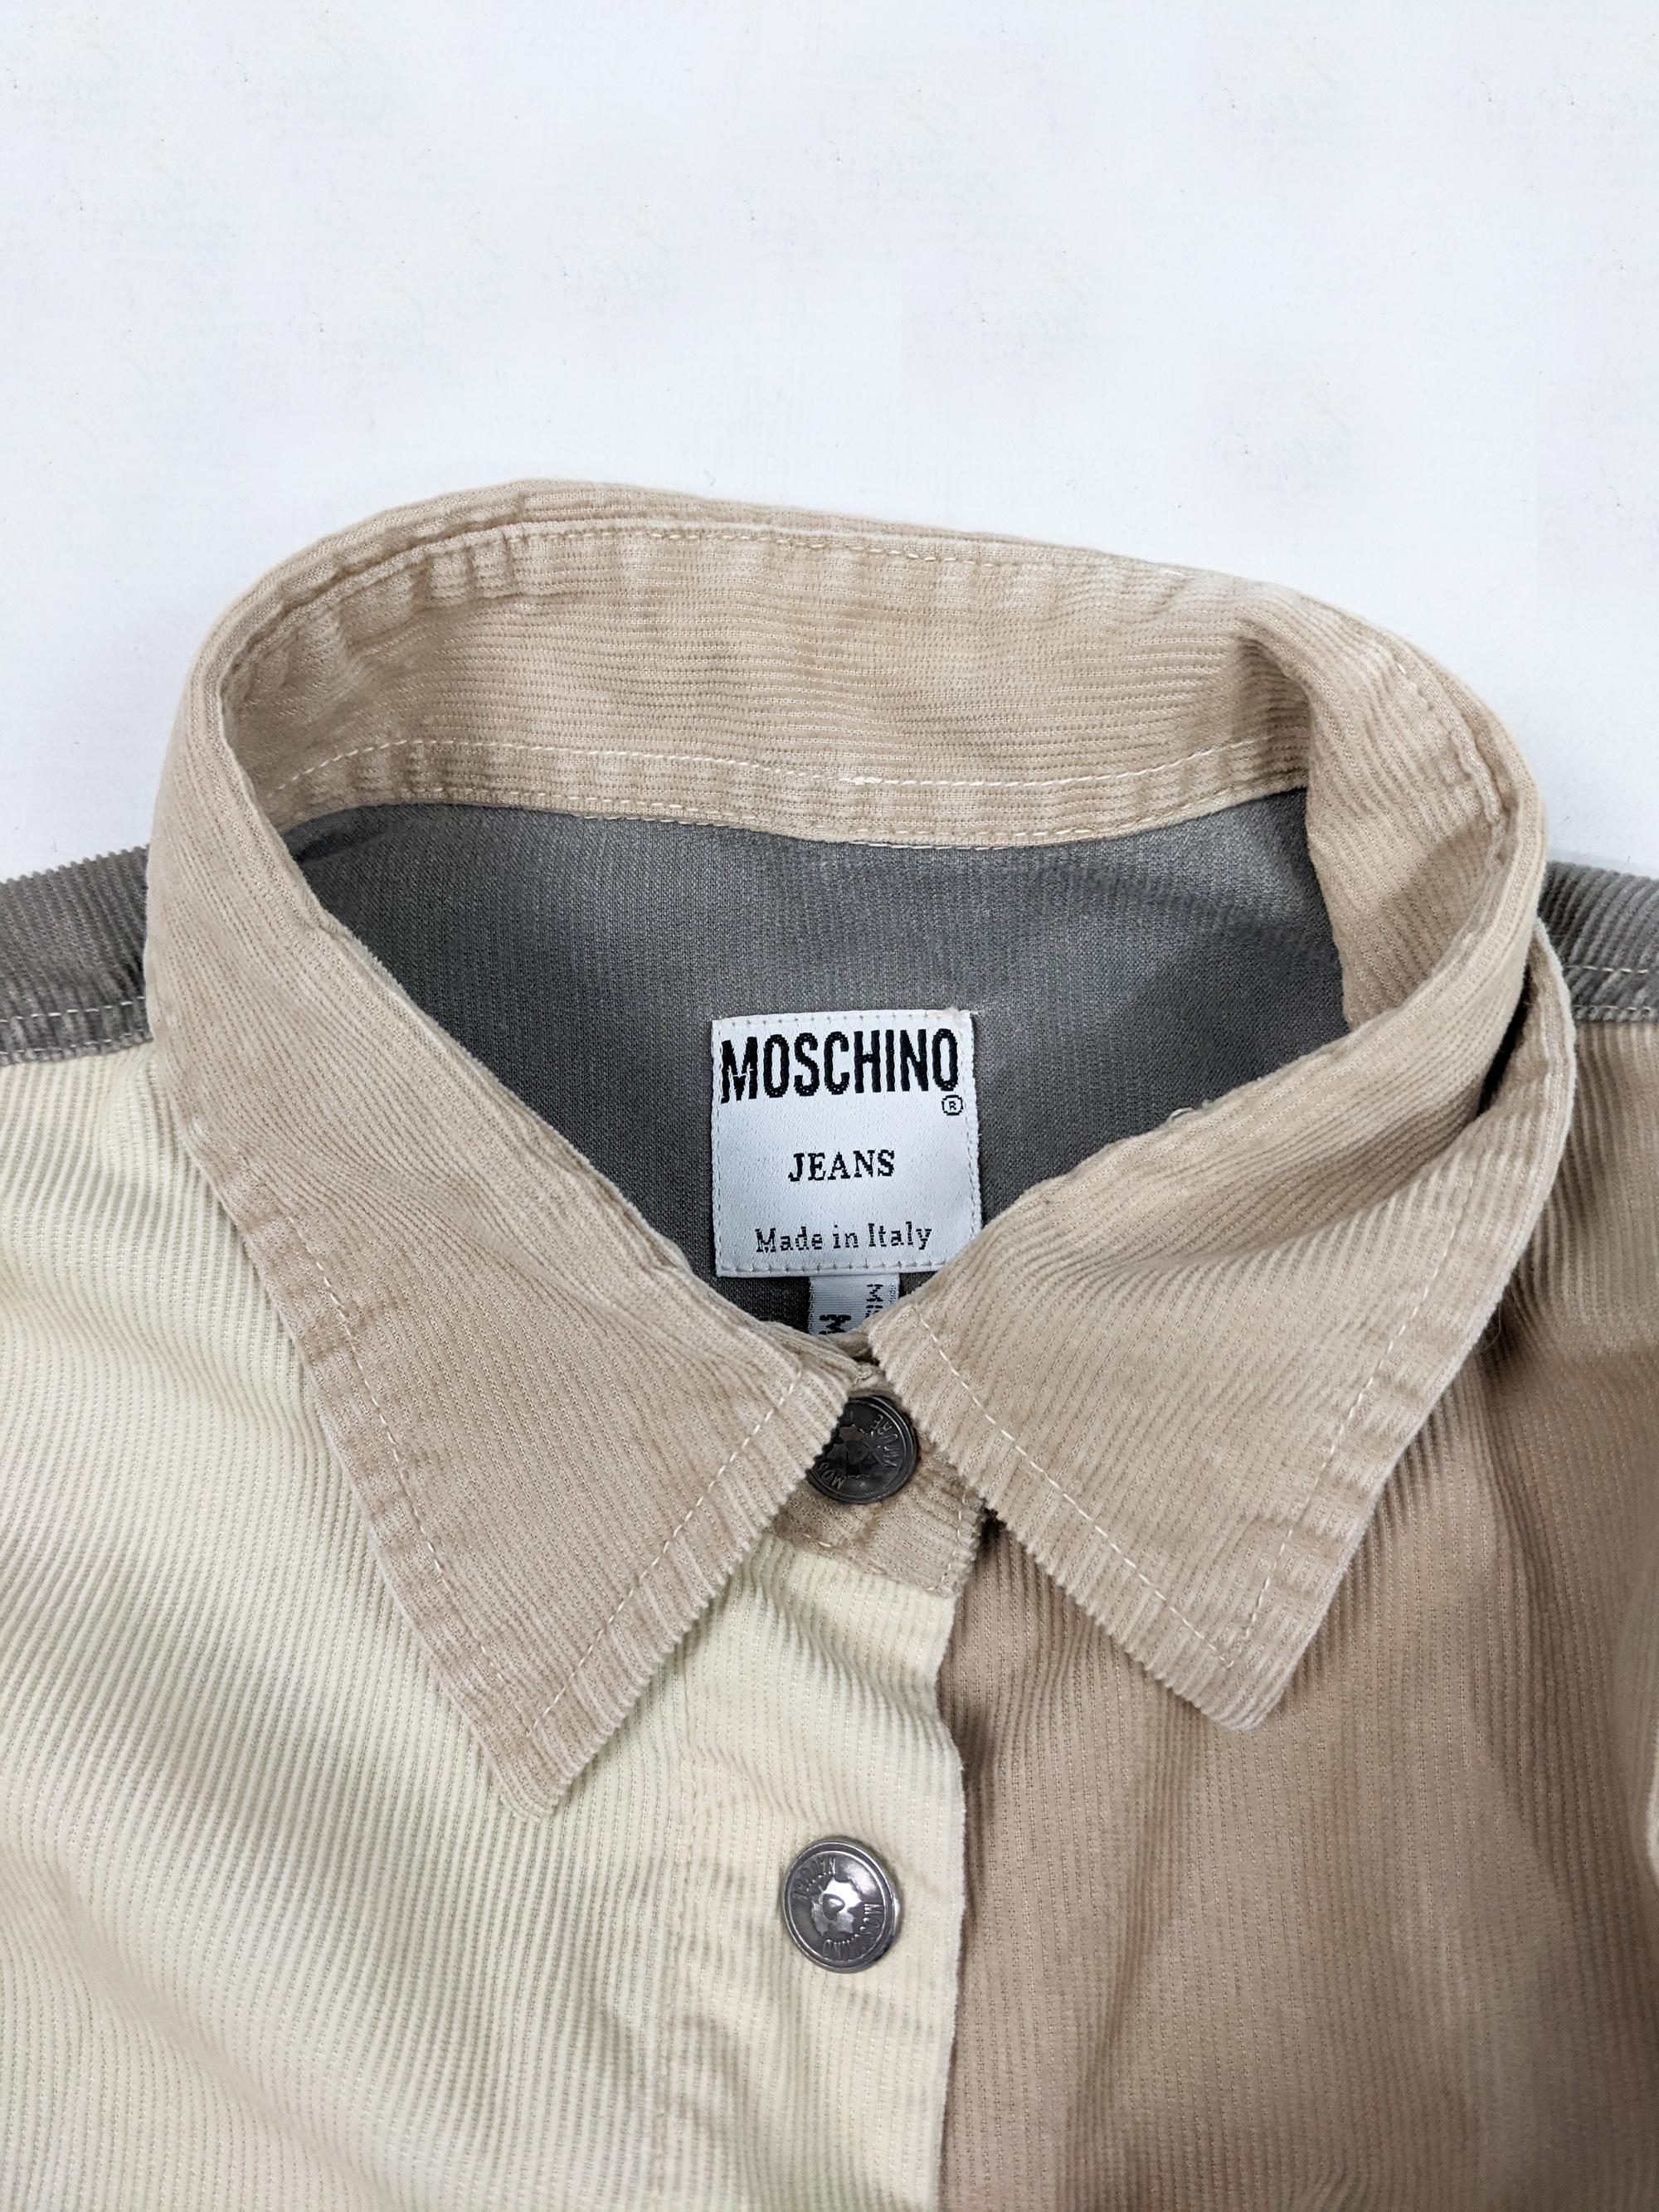 Moschino Vintage Mens Embroidered Cord Shirt 4